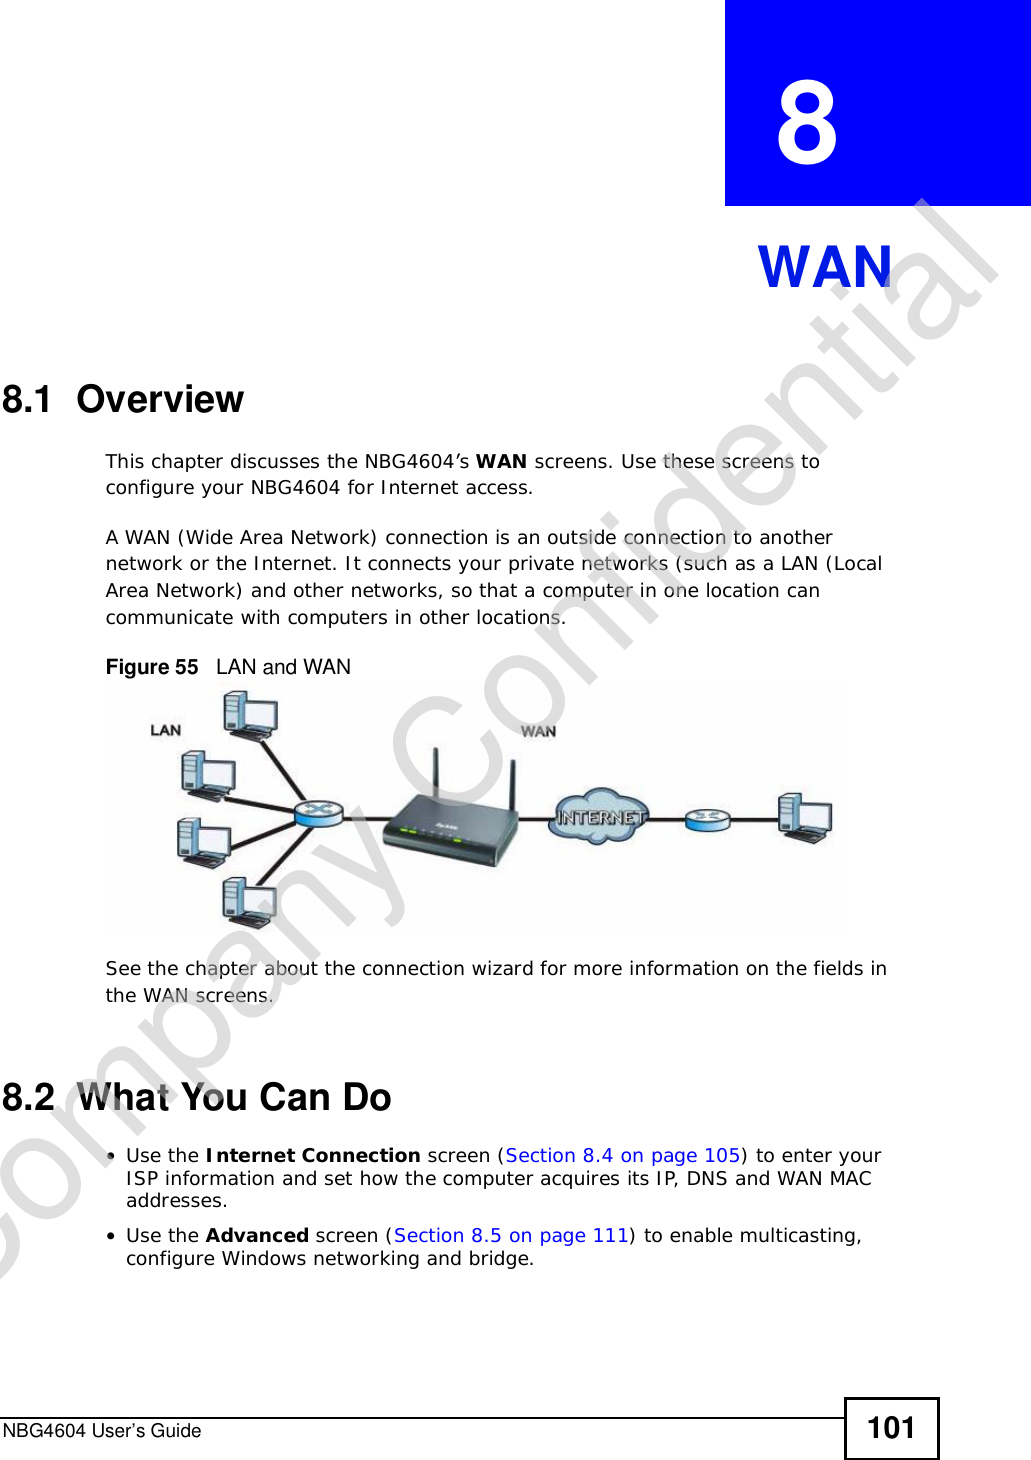 NBG4604 User’s Guide 101CHAPTER  8 WAN8.1  OverviewThis chapter discusses the NBG4604’s WAN screens. Use these screens to configure your NBG4604 for Internet access.A WAN (Wide Area Network) connection is an outside connection to another network or the Internet. It connects your private networks (such as a LAN (Local Area Network) and other networks, so that a computer in one location can communicate with computers in other locations.Figure 55   LAN and WANSee the chapter about the connection wizard for more information on the fields in the WAN screens.8.2  What You Can Do•Use the Internet Connection screen (Section 8.4 on page 105) to enter your ISP information and set how the computer acquires its IP, DNS and WAN MAC addresses.•Use the Advanced screen (Section 8.5 on page 111) to enable multicasting, configure Windows networking and bridge.Company Confidential